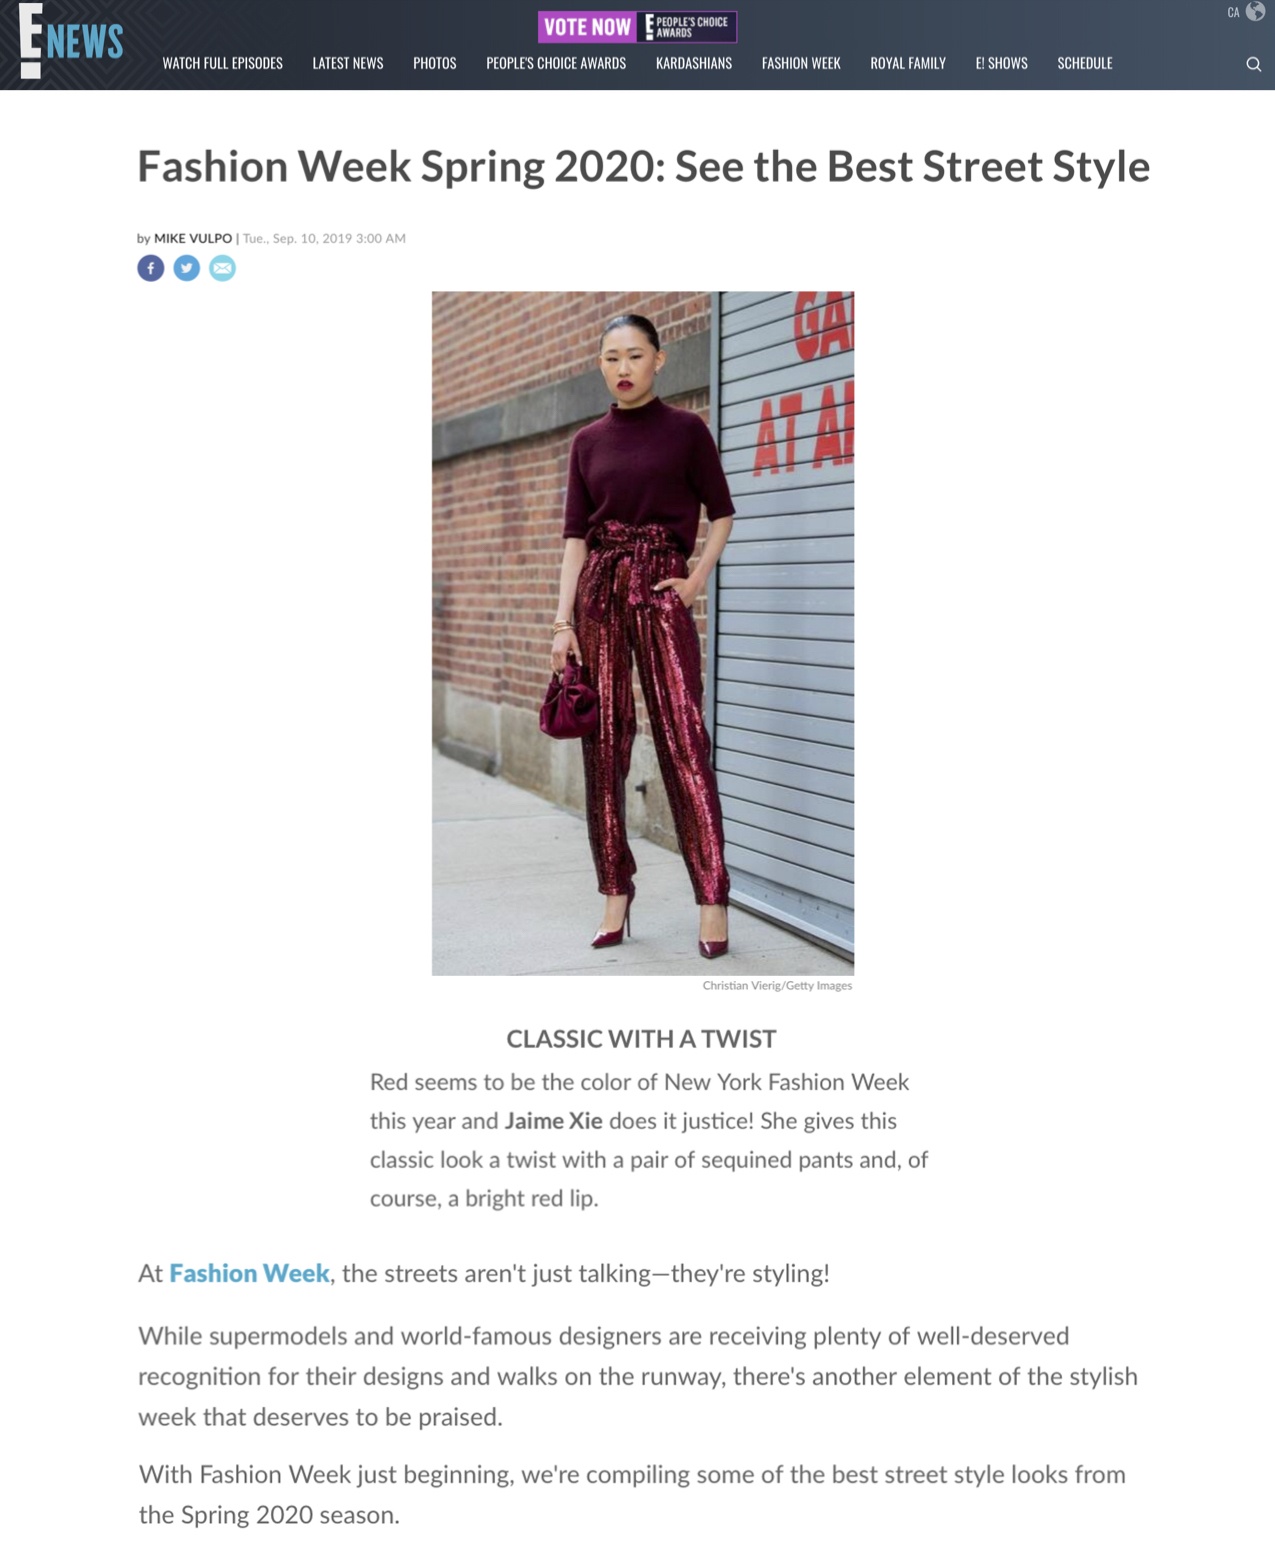 E! Online: Fashion Week Spring 2020: See the Best Street Style